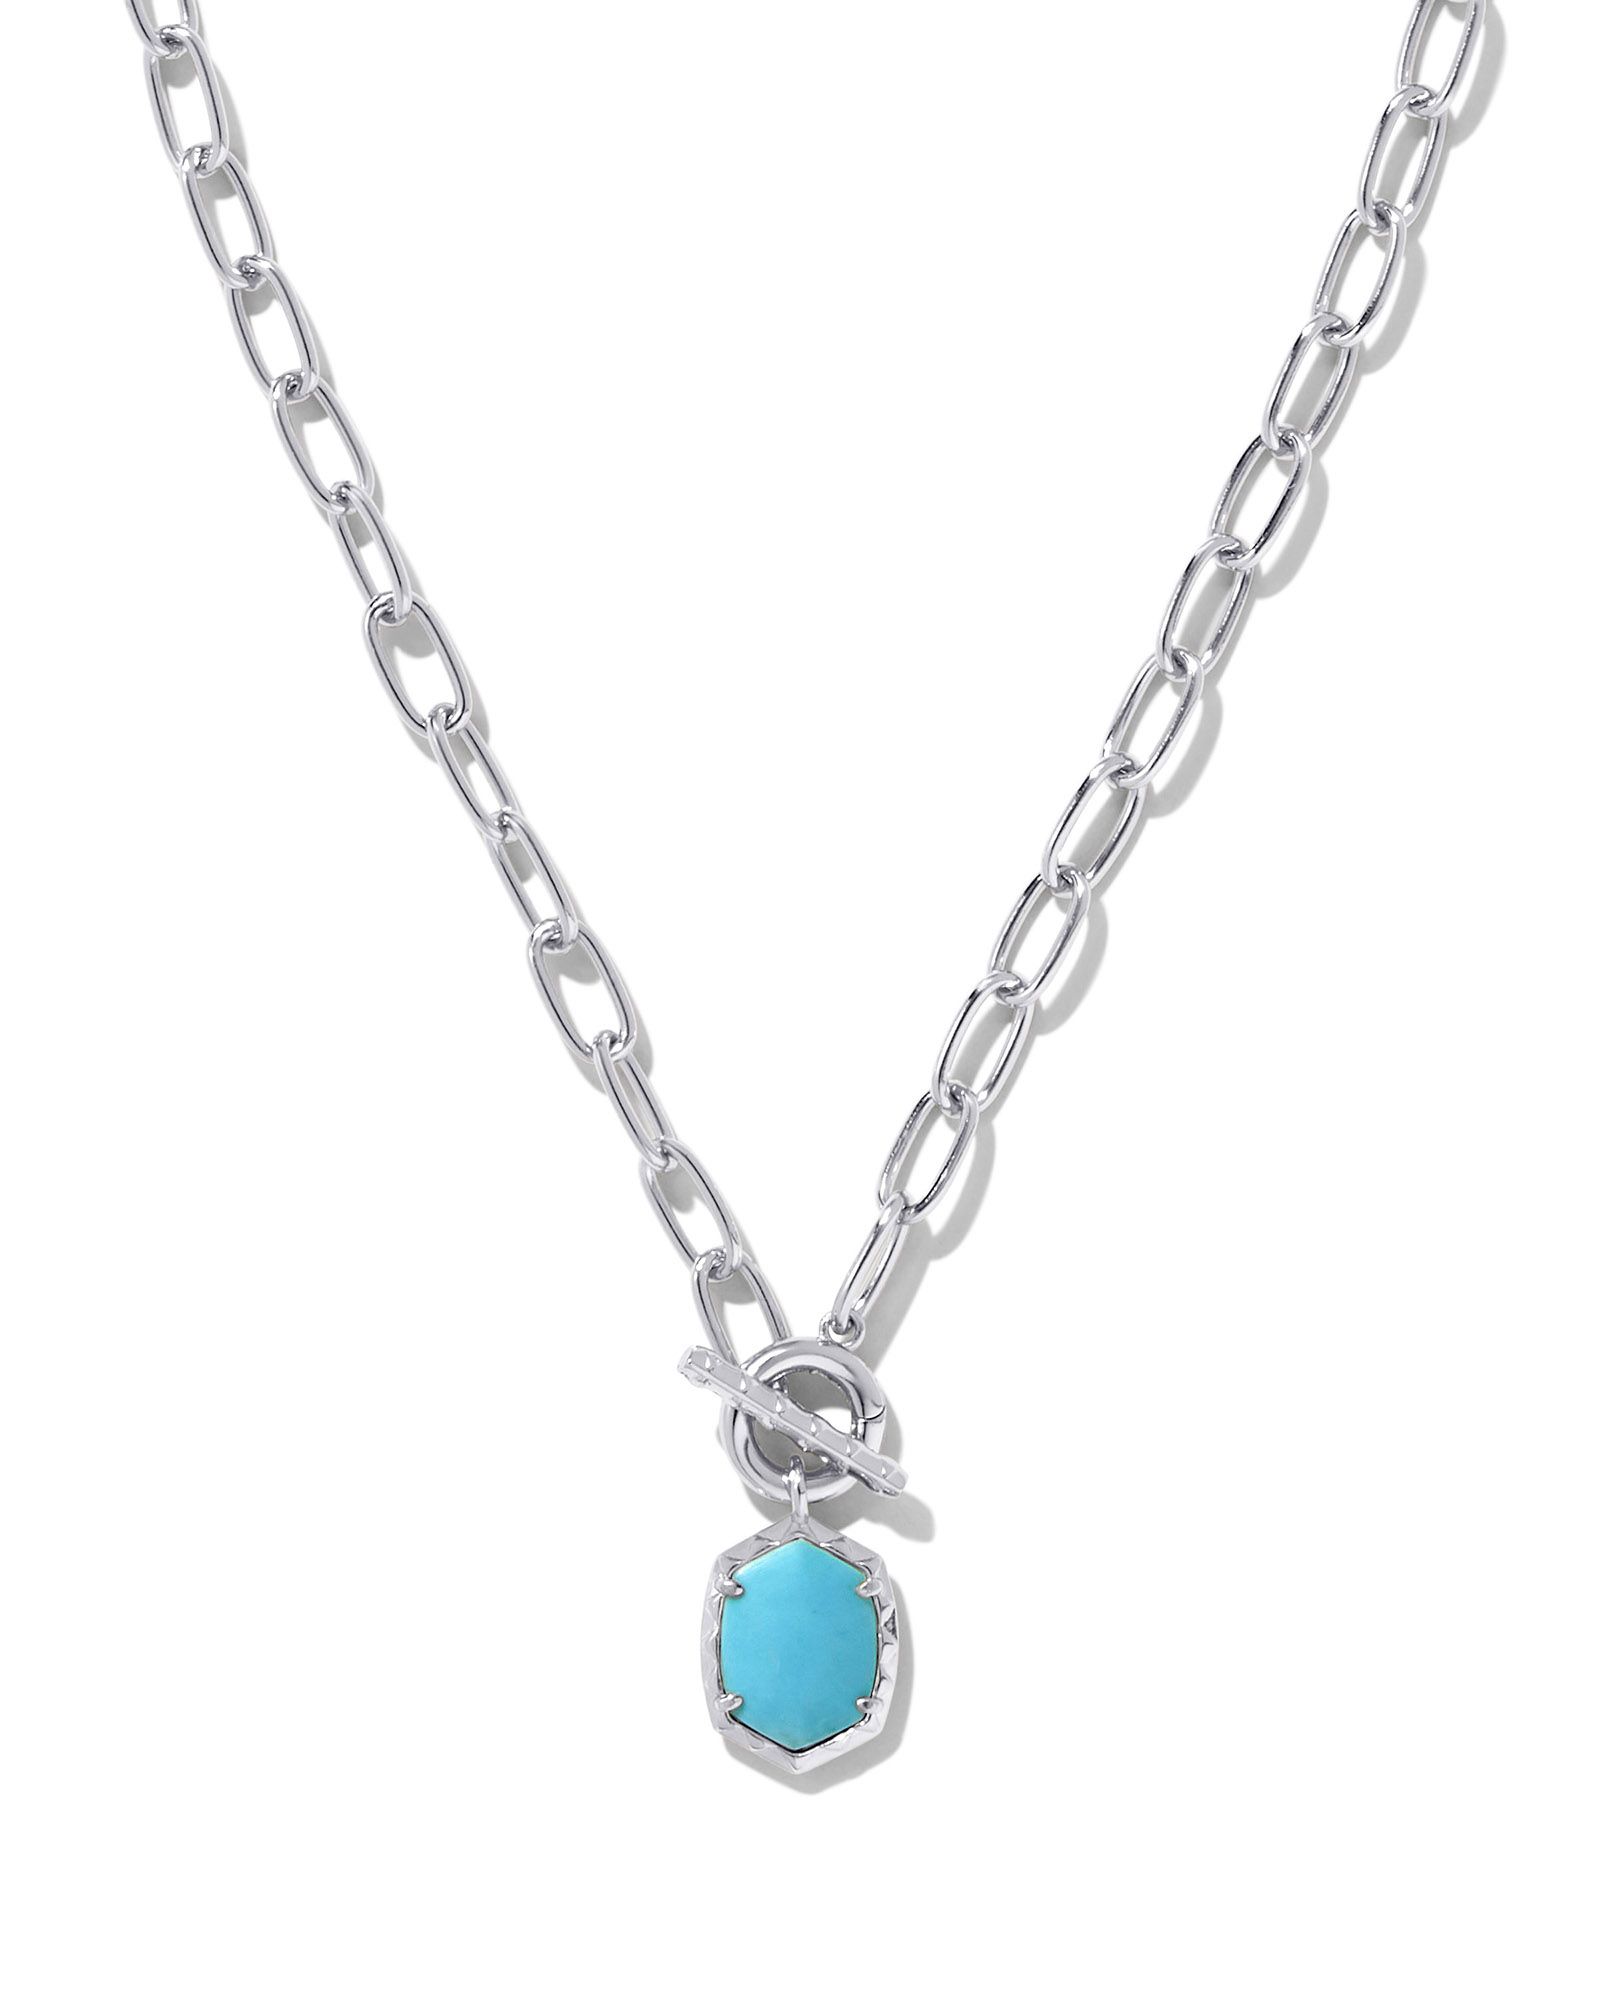 Daphne Convertible Silver Link and Chain Necklace in Variegated Turquoise Magnesite | Kendra Scott